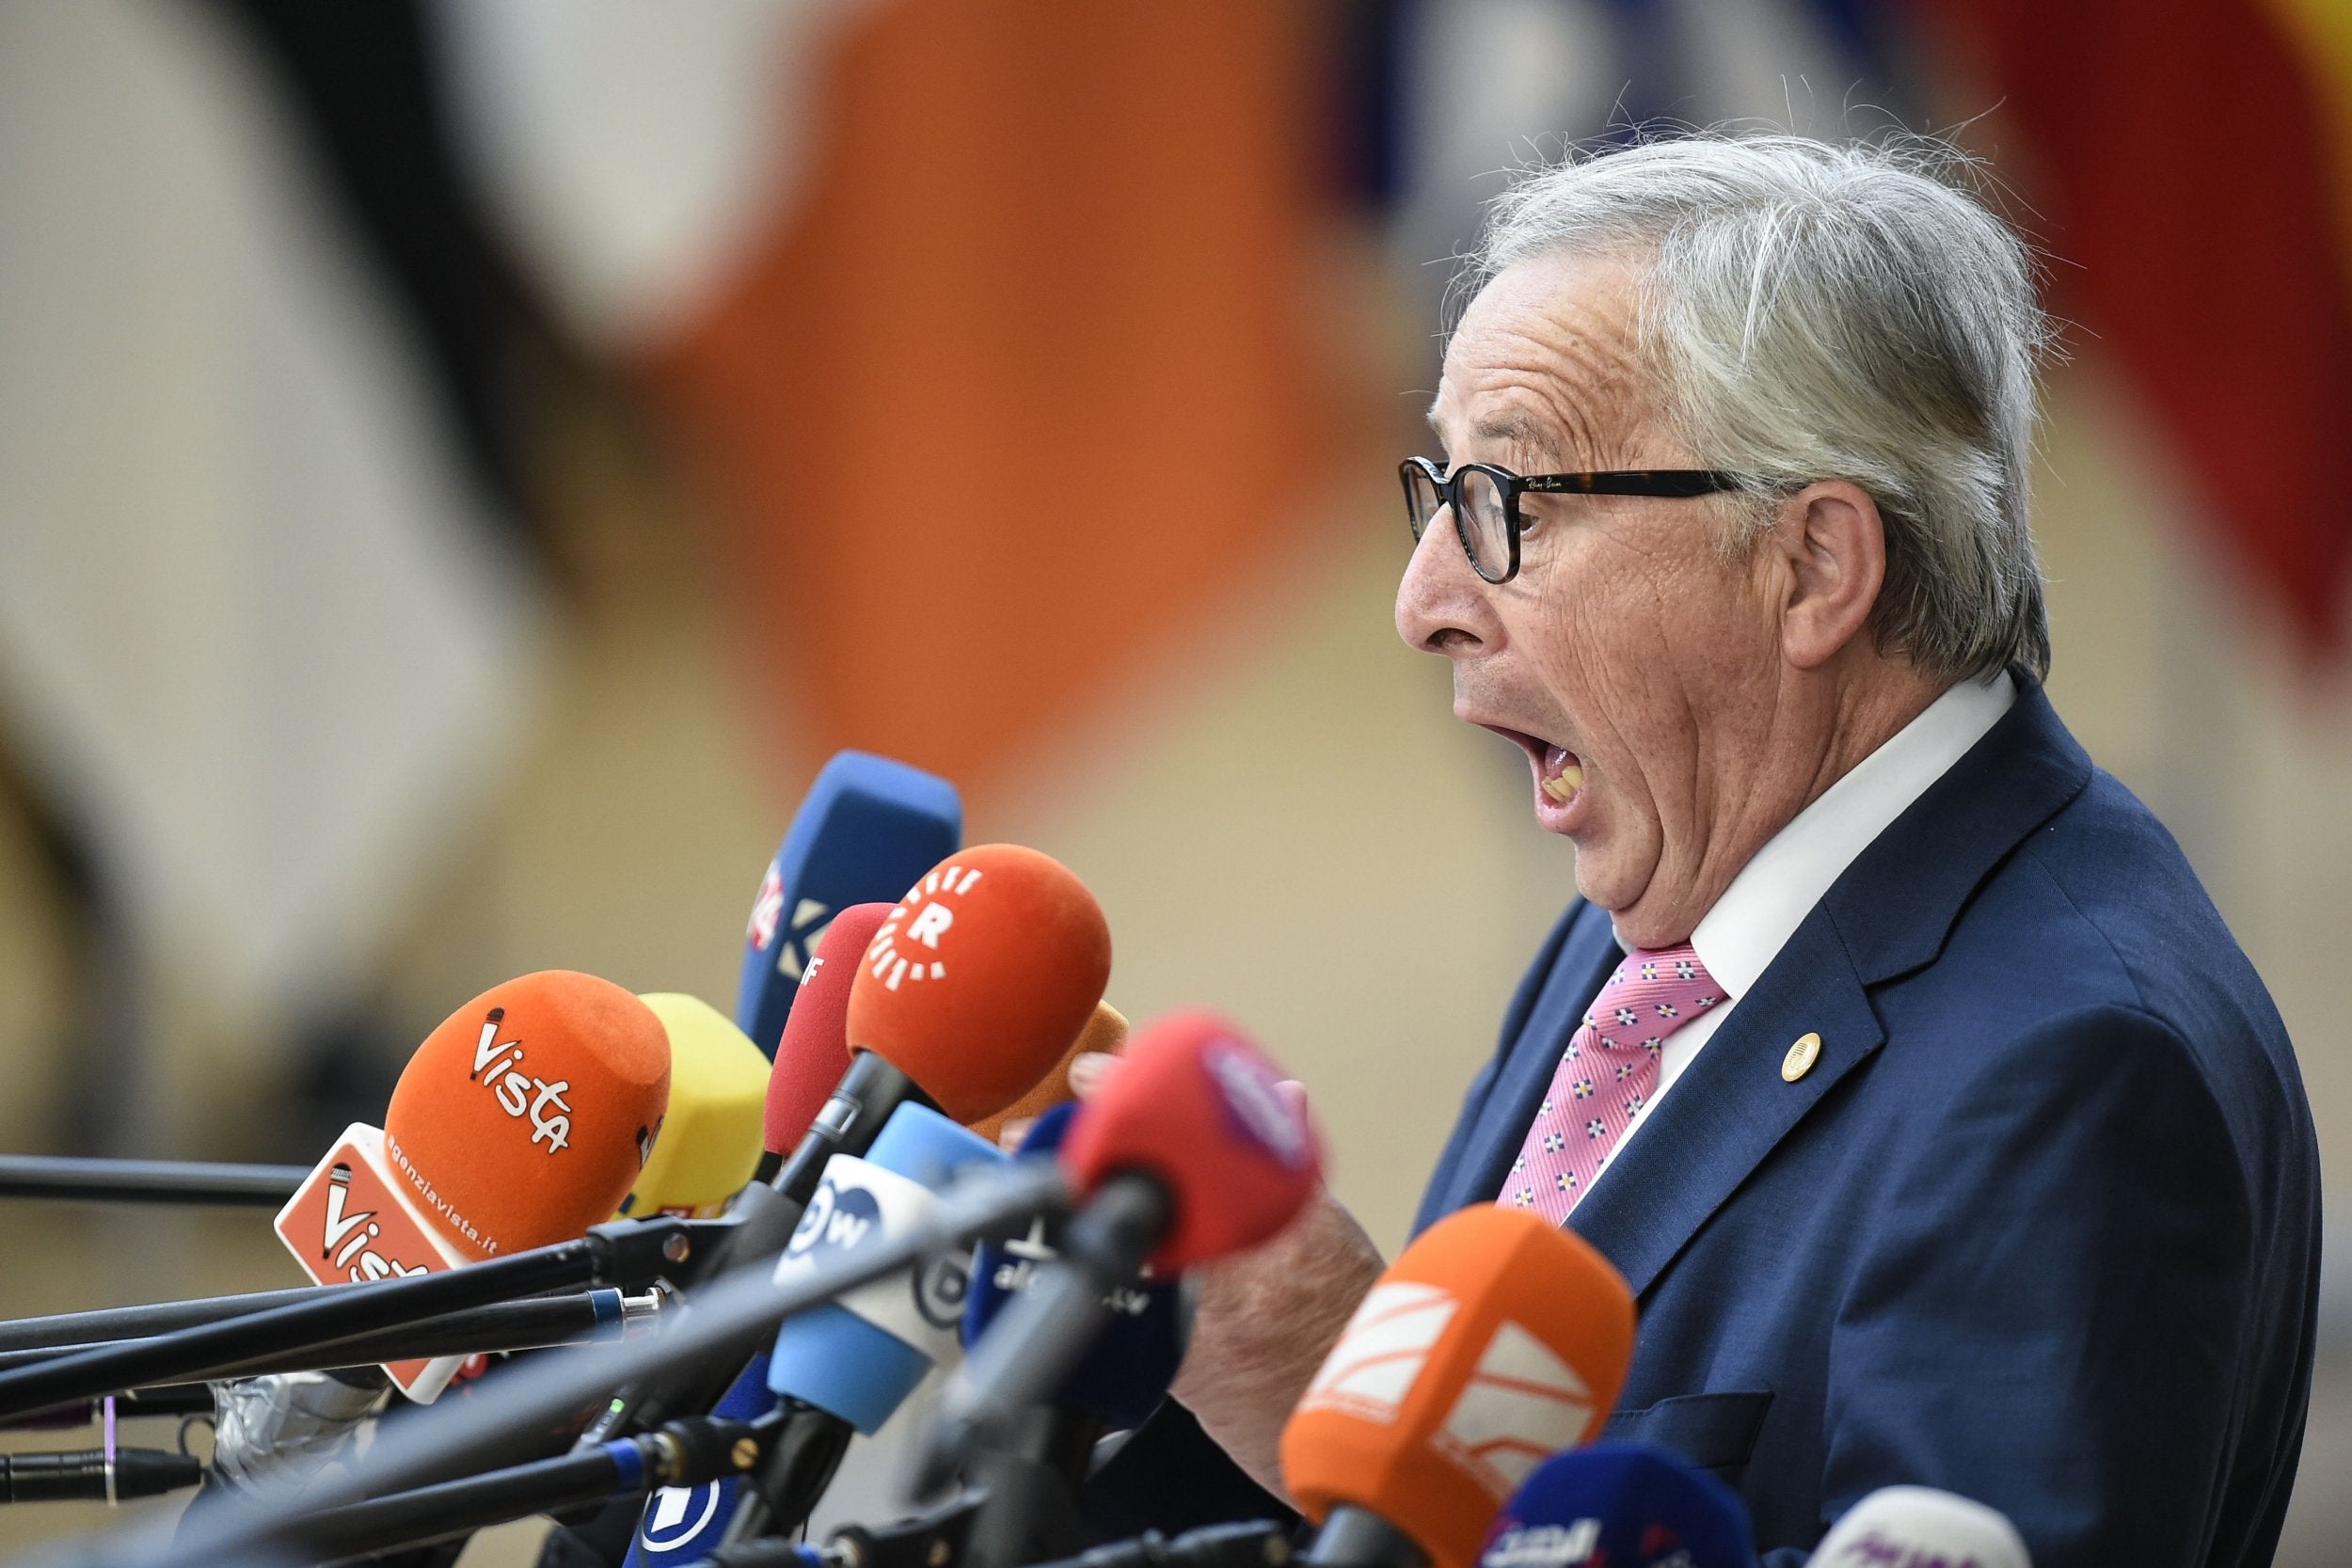 Jean-Claude Juncker said he was always amazed at what he was blamed for in the media